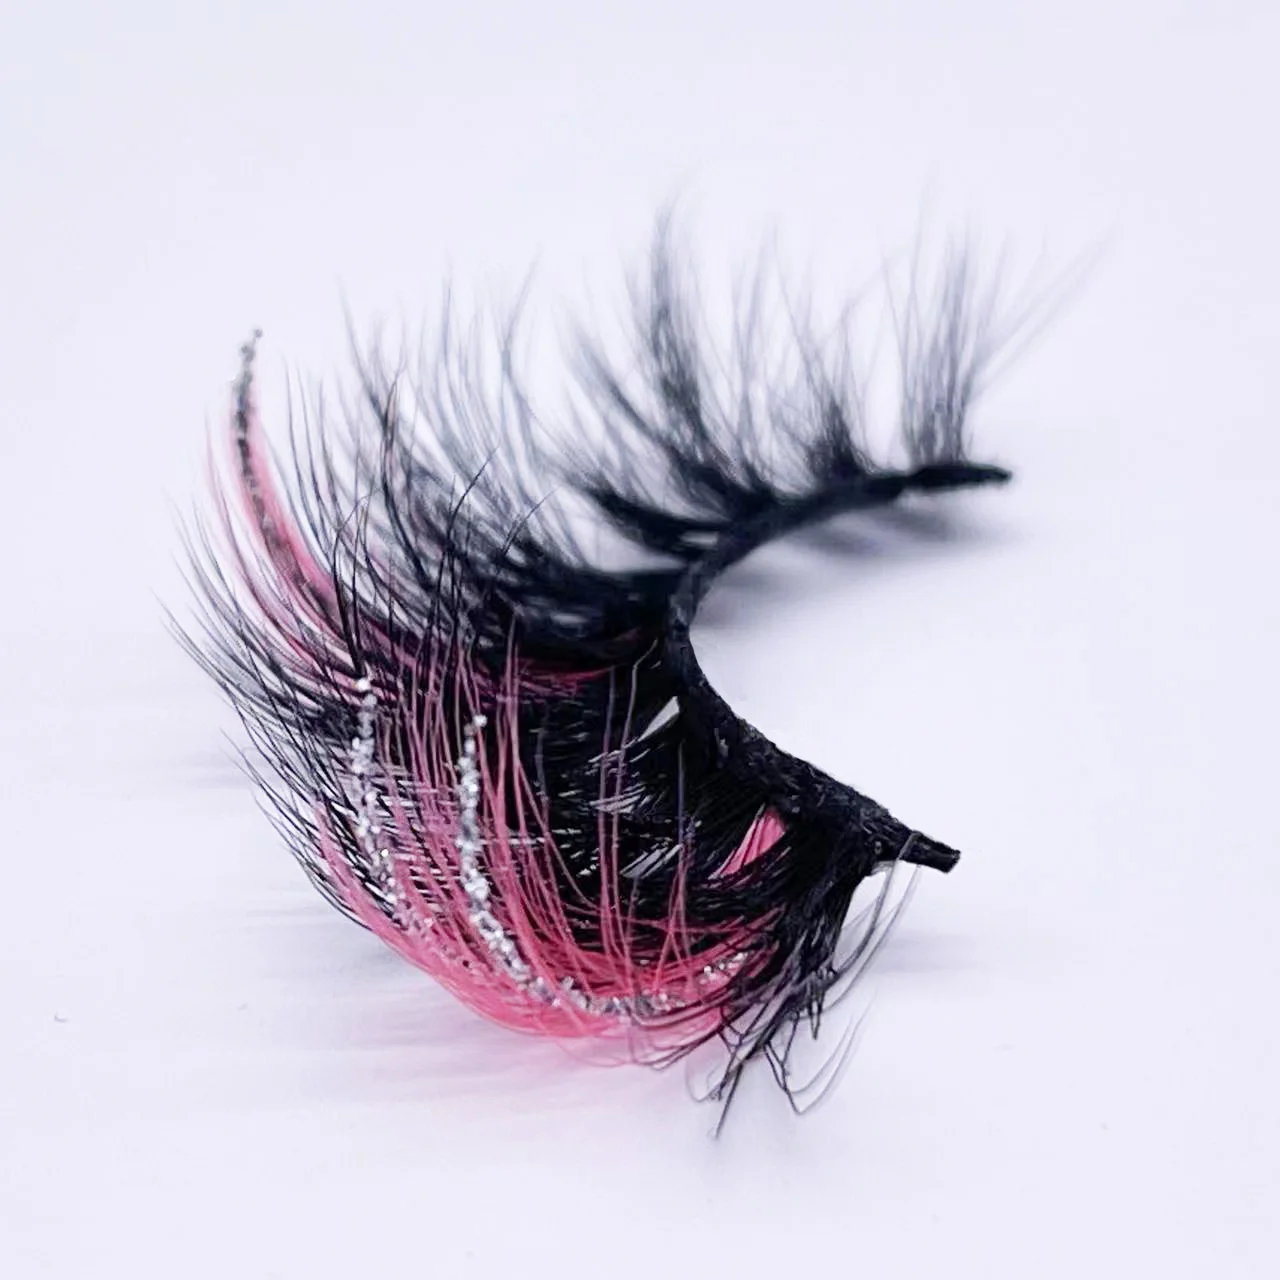 Hbzgtlad Colored Lashes Glitter Mink 15mm -20mm Fluffy Color Streaks Cosplay Makeup Beauty Eyelashes -Outlet Maid Outfit Store S2cff054147ad41b3b11c43af23152b69g.jpg